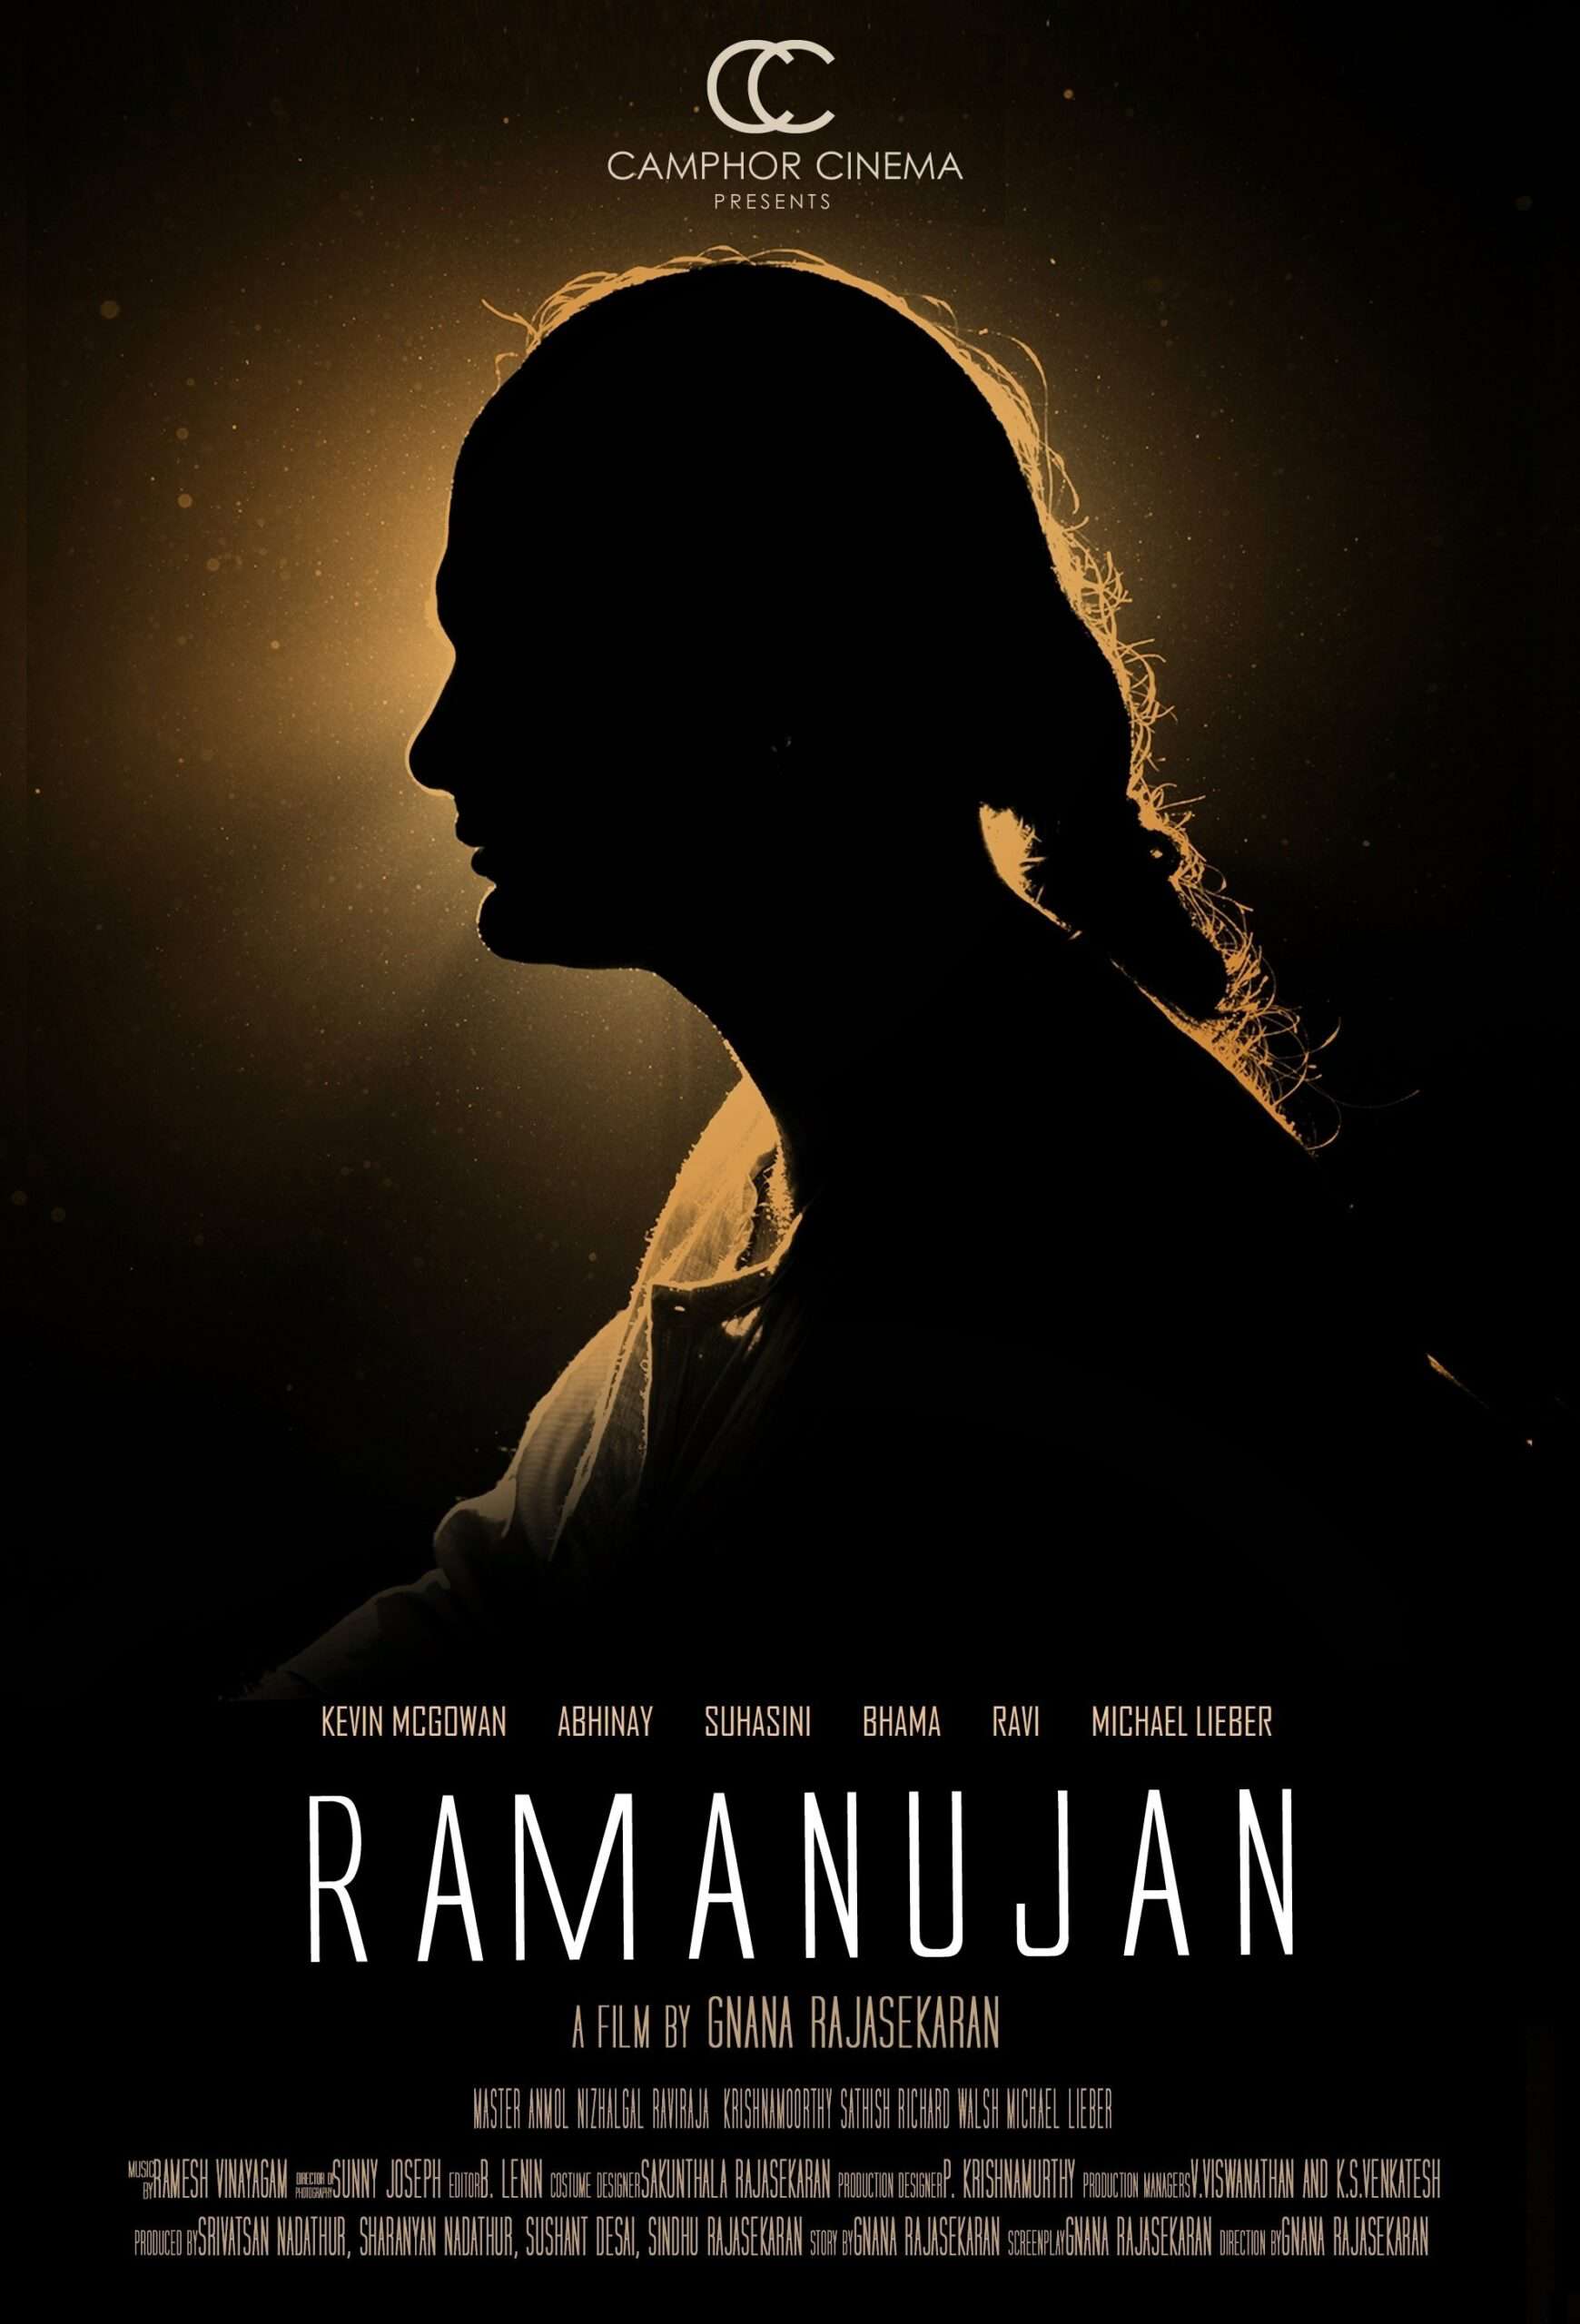 Ramanujan (2014) Best Math Movies to Add in Your Watchlist